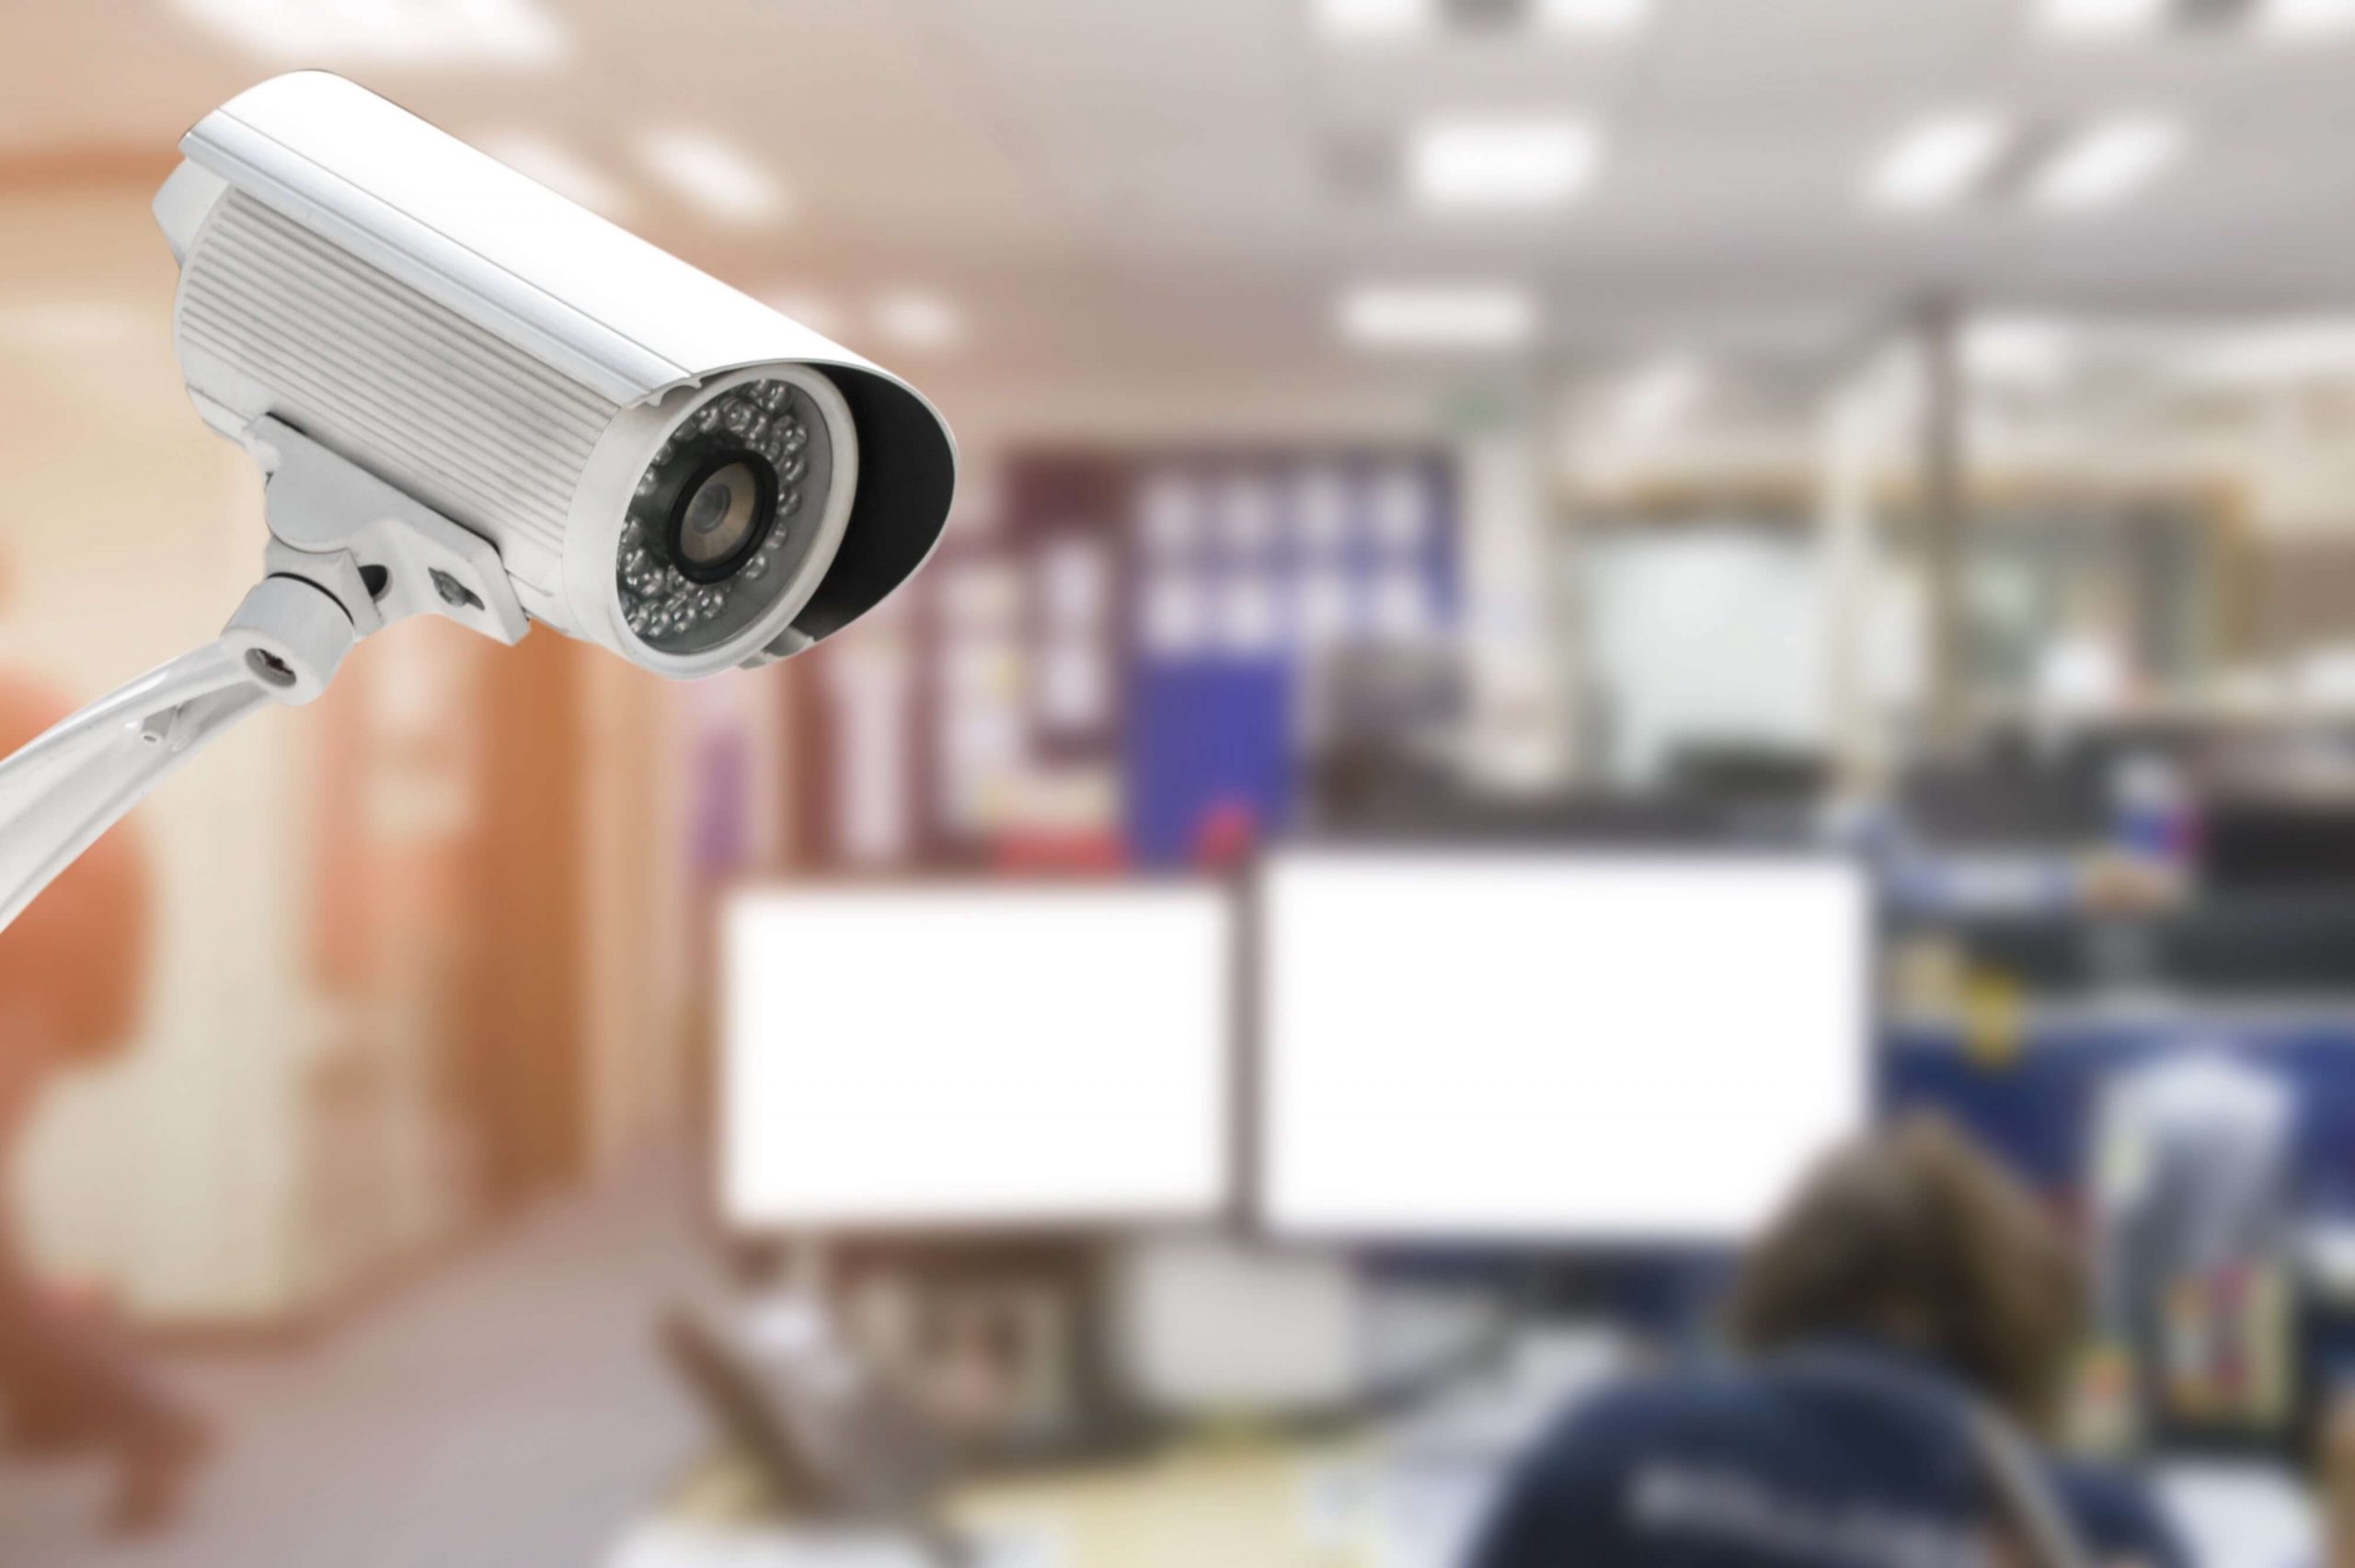 business's video security